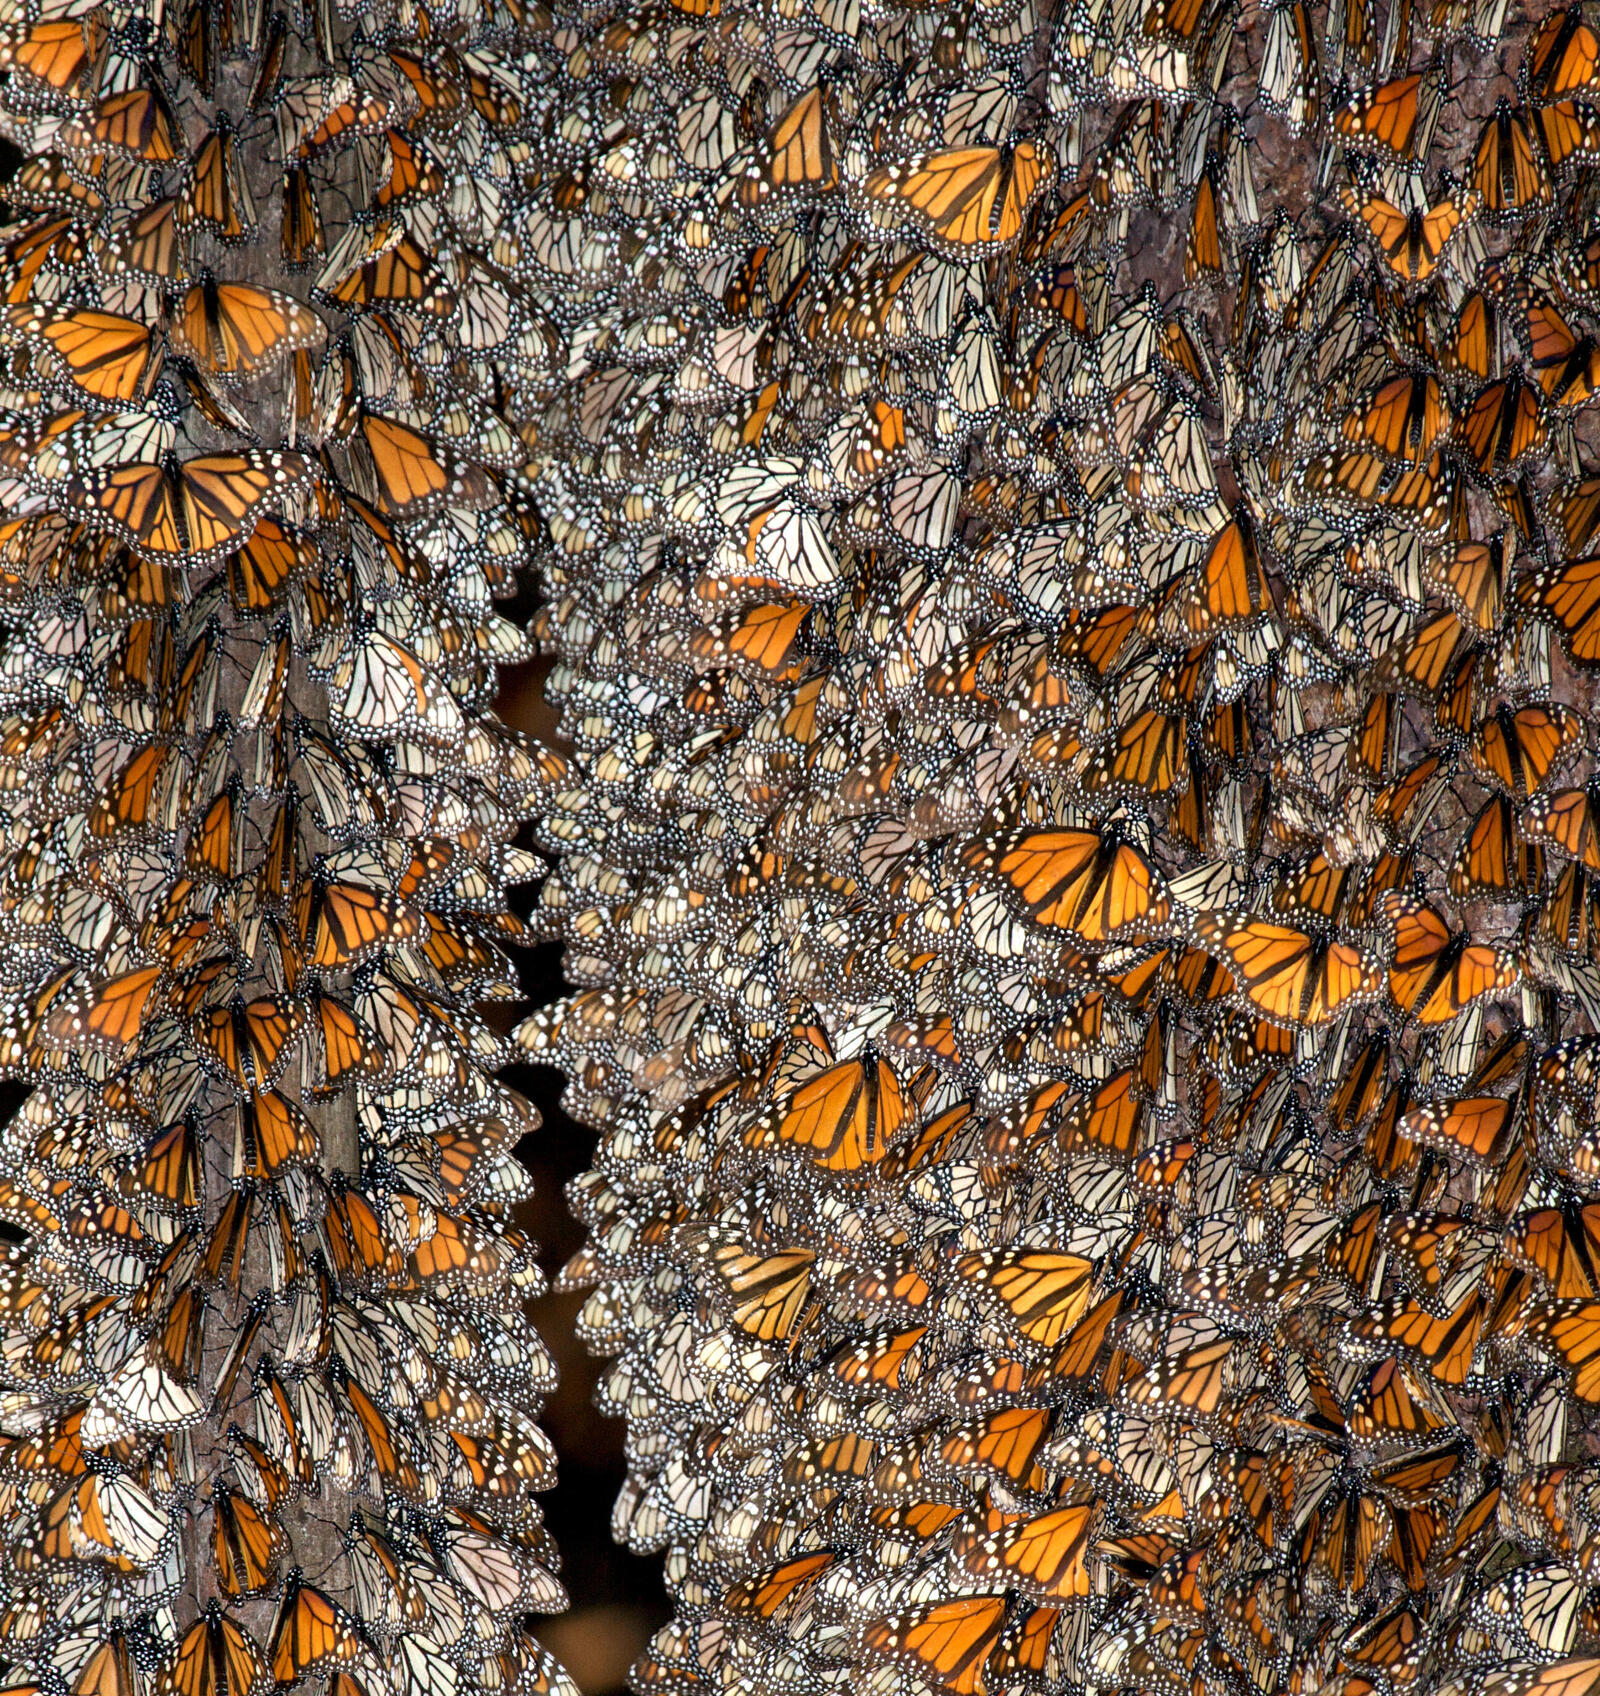 Discovering monarchs by the millions in Mexico's highlands Magazine